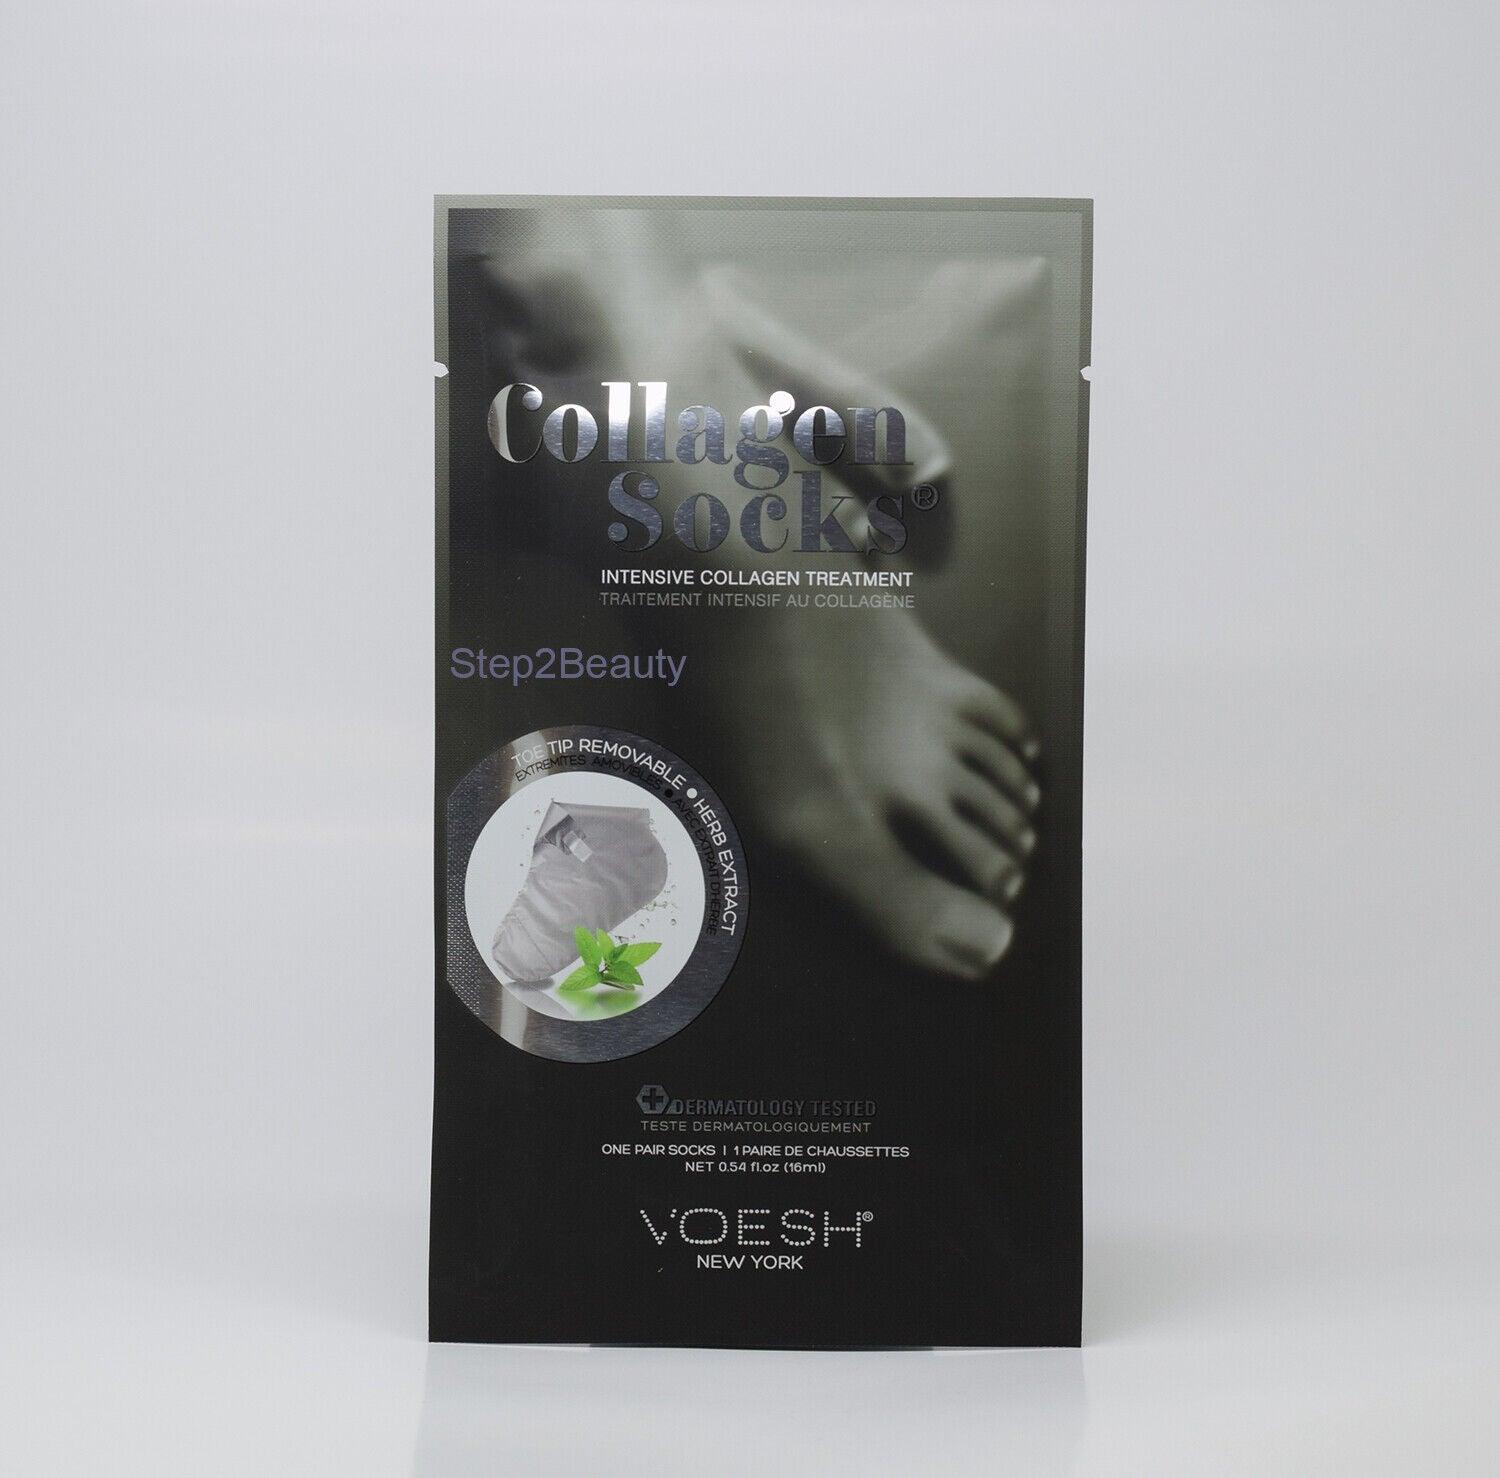 VOESH Collagen Socks - With Peppermint Oil Herd Extract